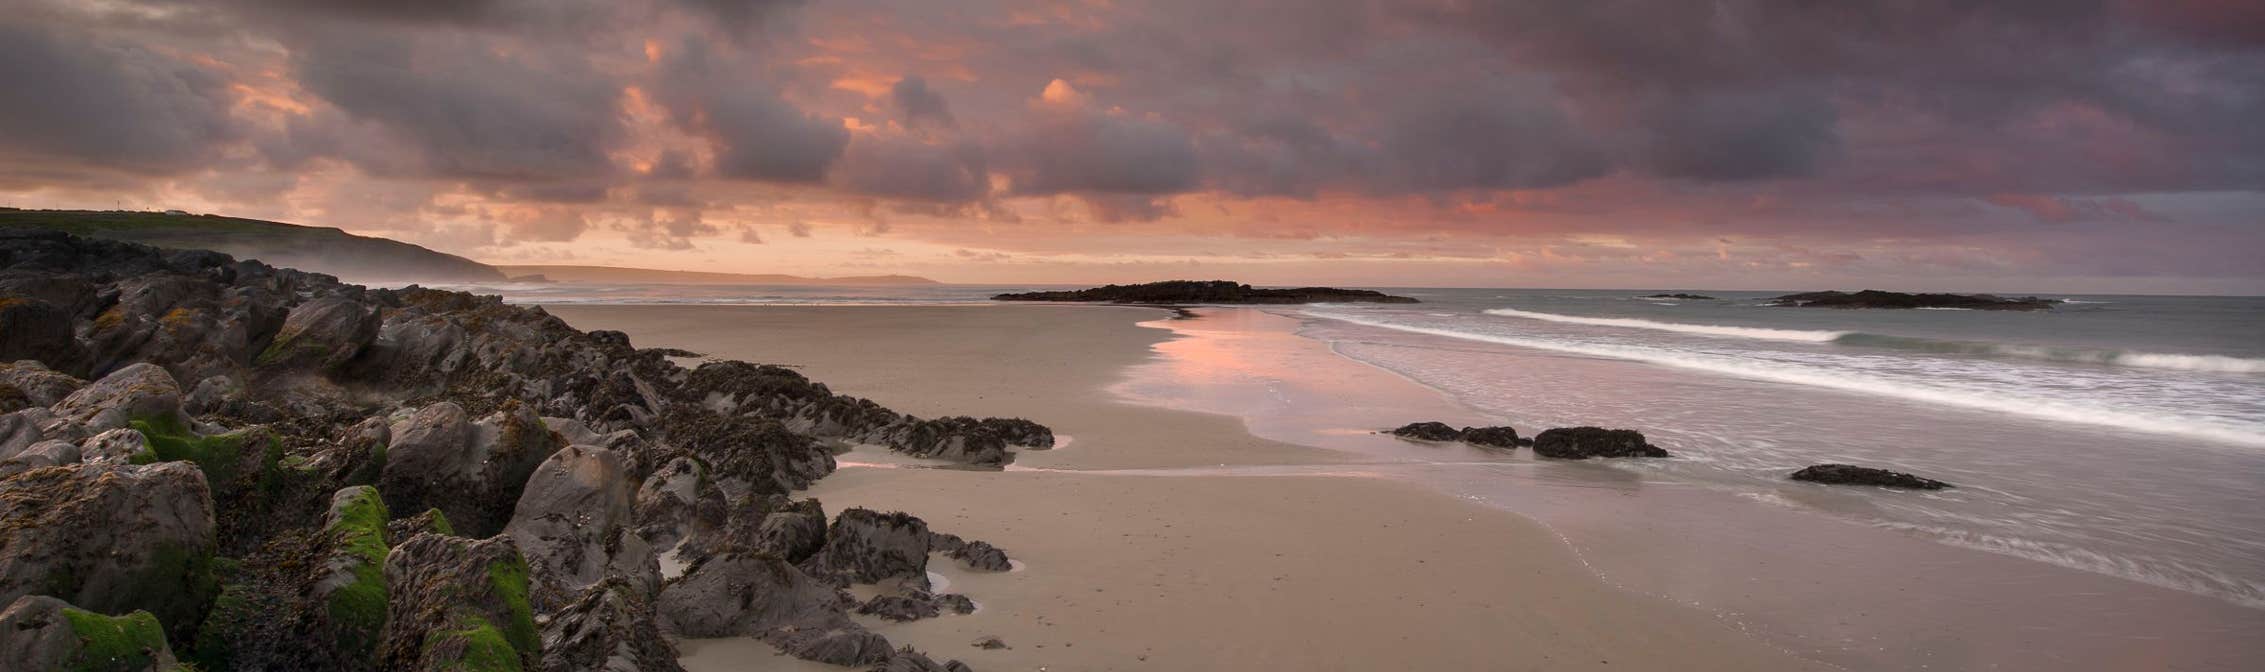 Owenahincha Beach in Rosscarbery in County Cork at sunset